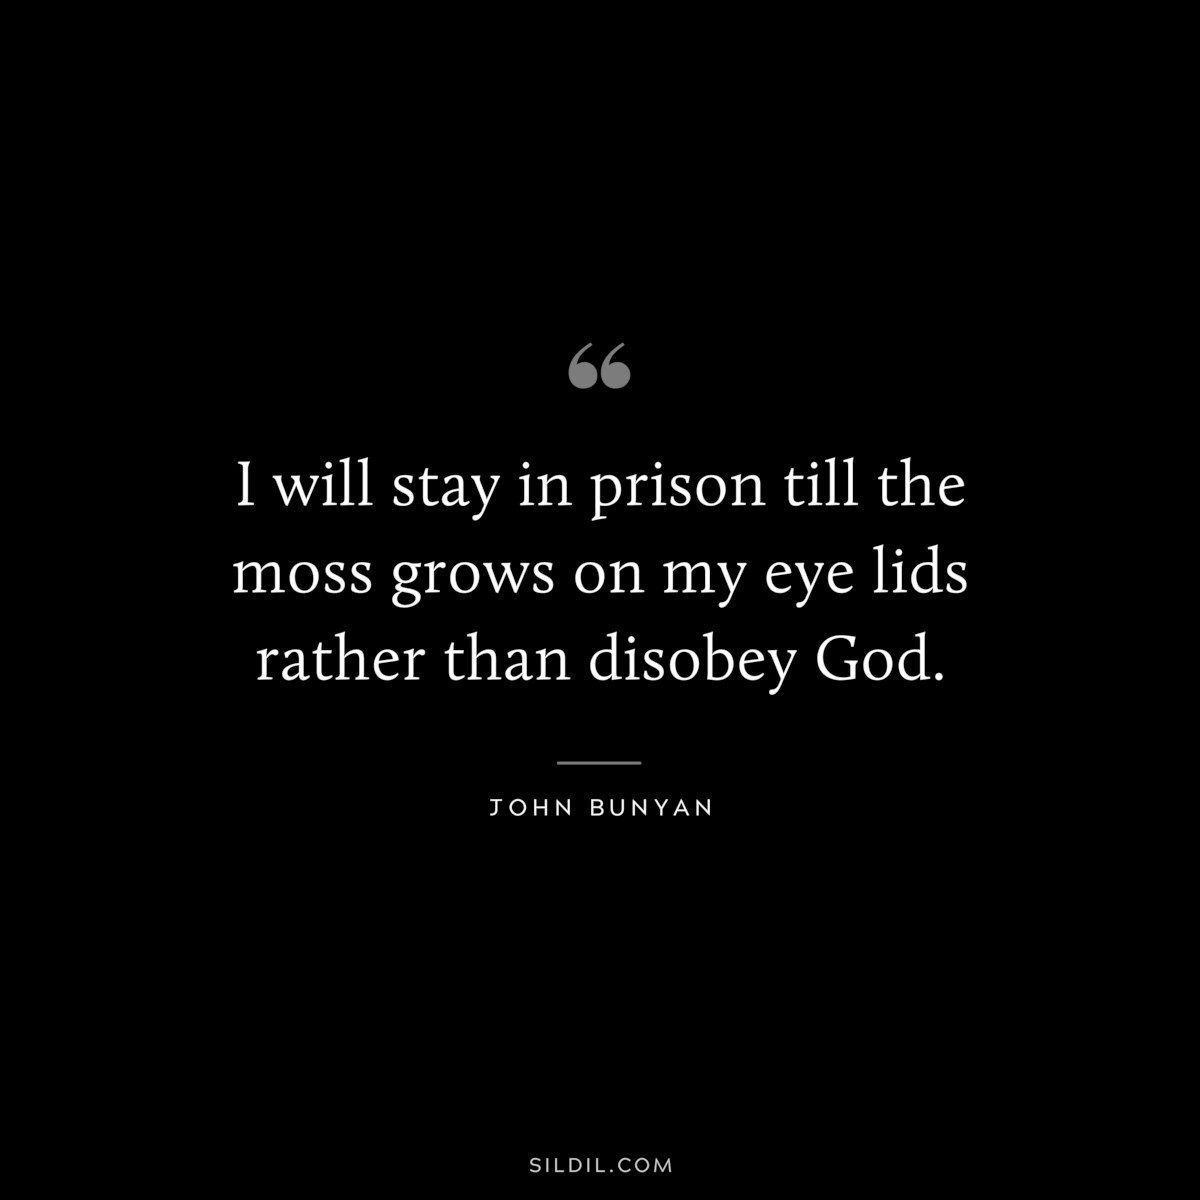 I will stay in prison till the moss grows on my eye lids rather than disobey God. ― John Bunyan